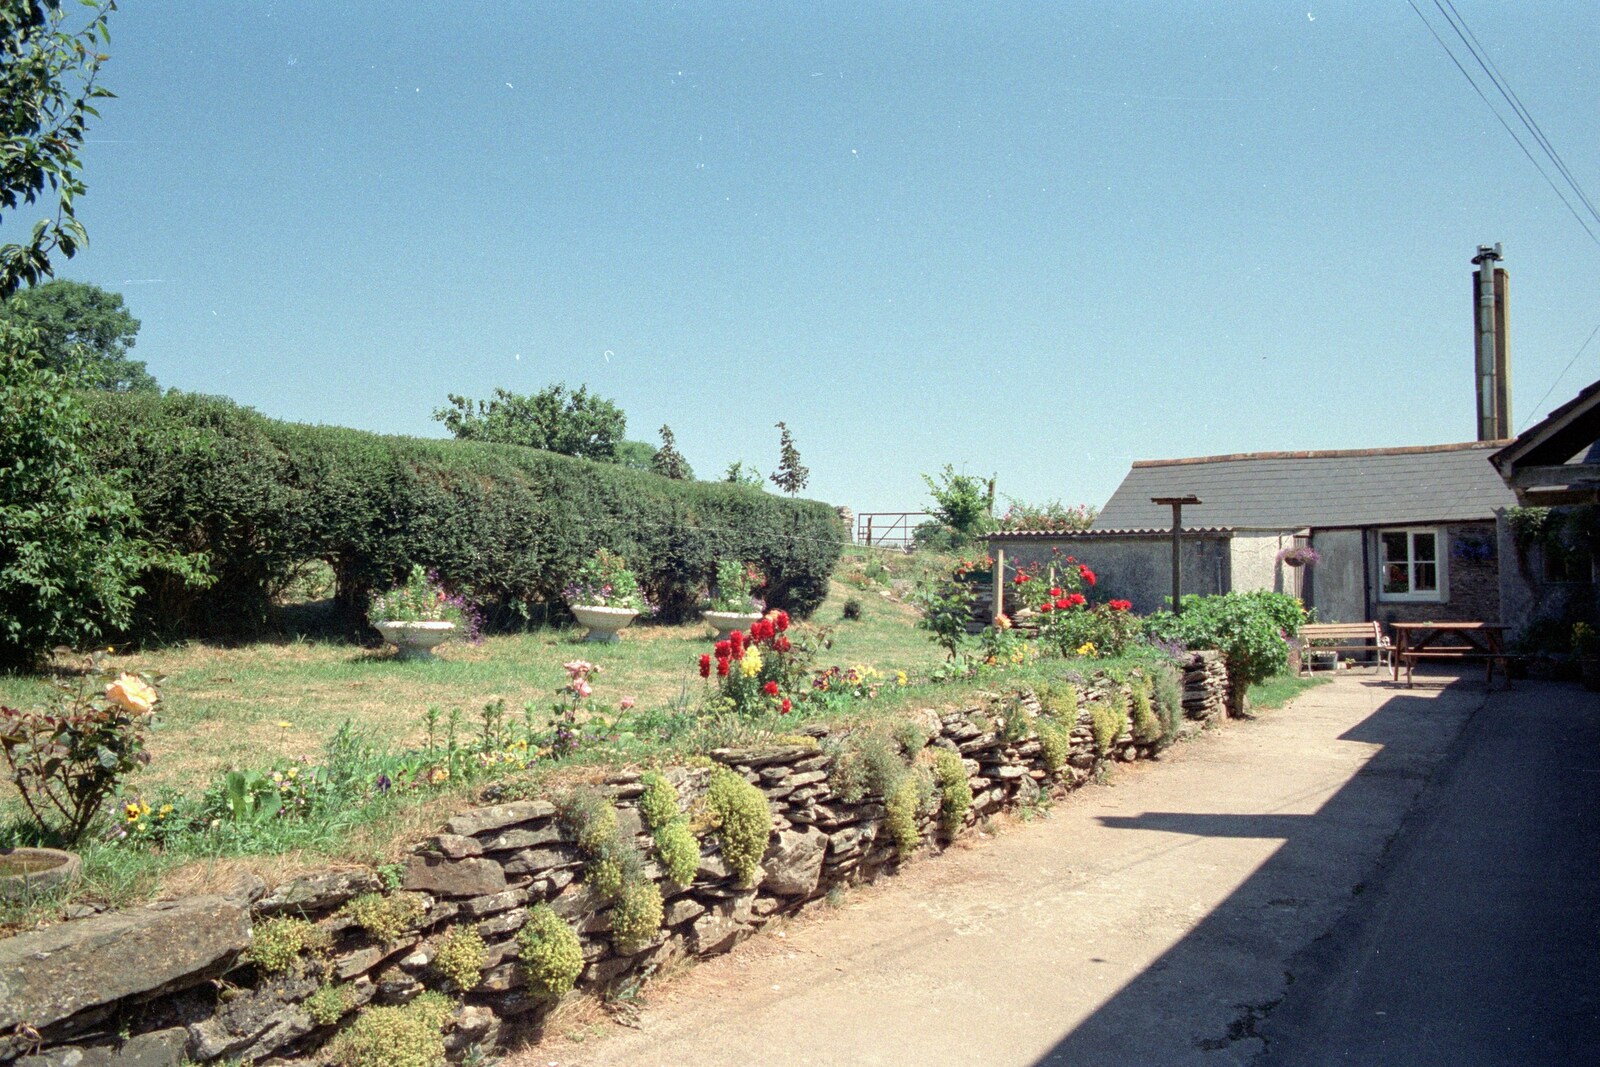 The front garden of Pitt Farm from Uni: A Trip to the Riviera and Oberon Gets New Shoes, Torquay and Harbertonford, Devon - 3rd July 1989